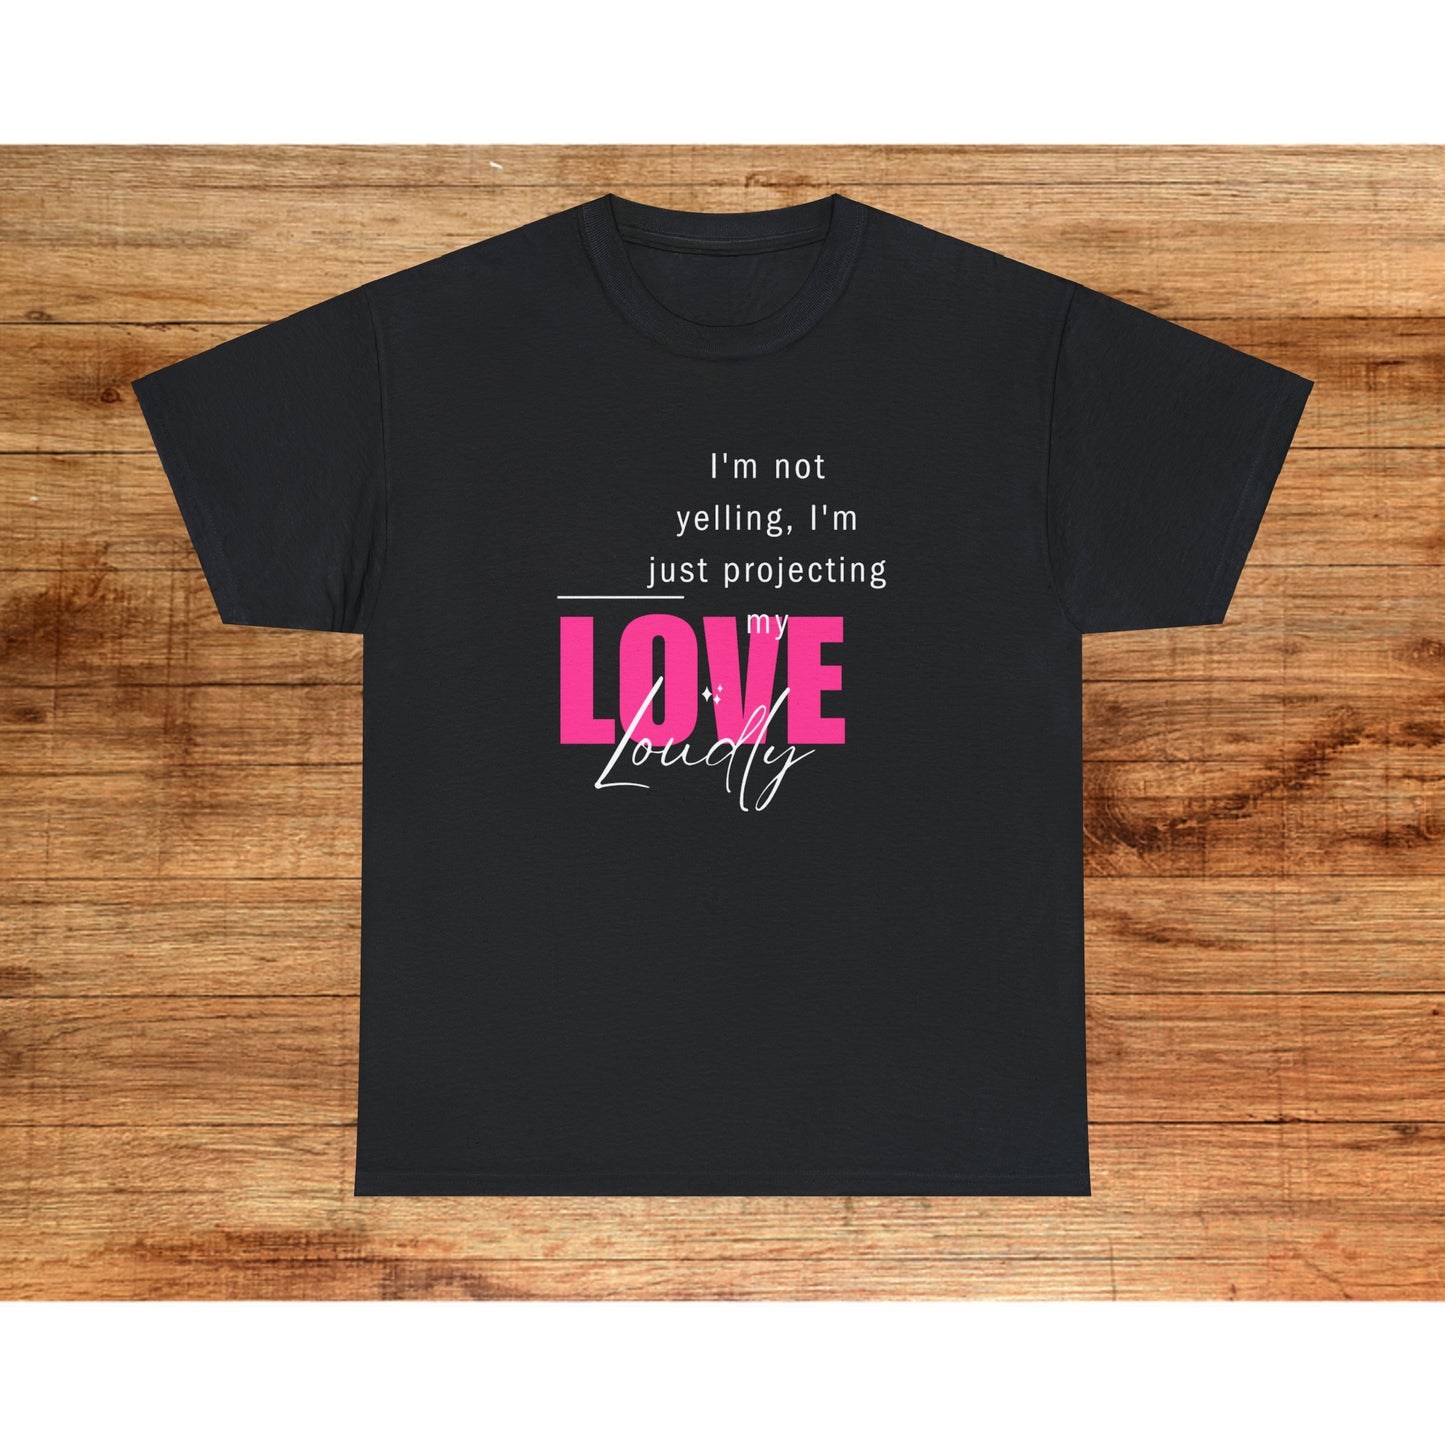 Yelling with love T-shirt